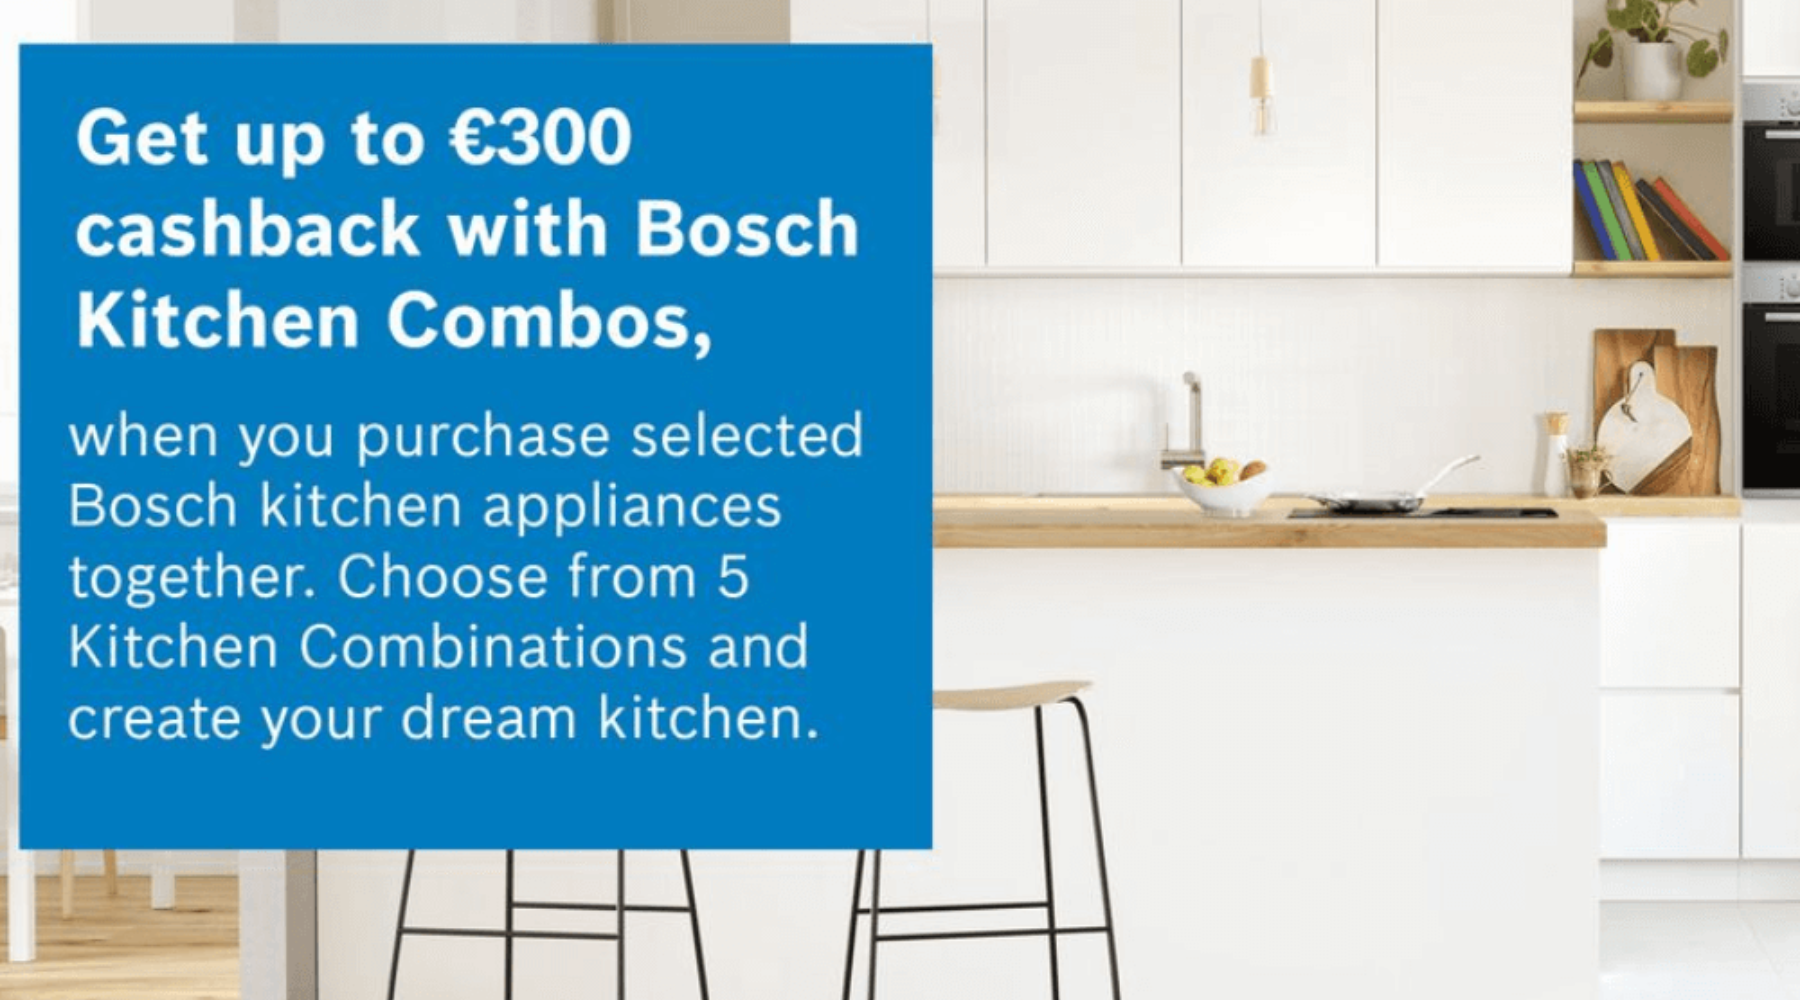 Bosch Cashback: Upgrade your Kitchen and Save